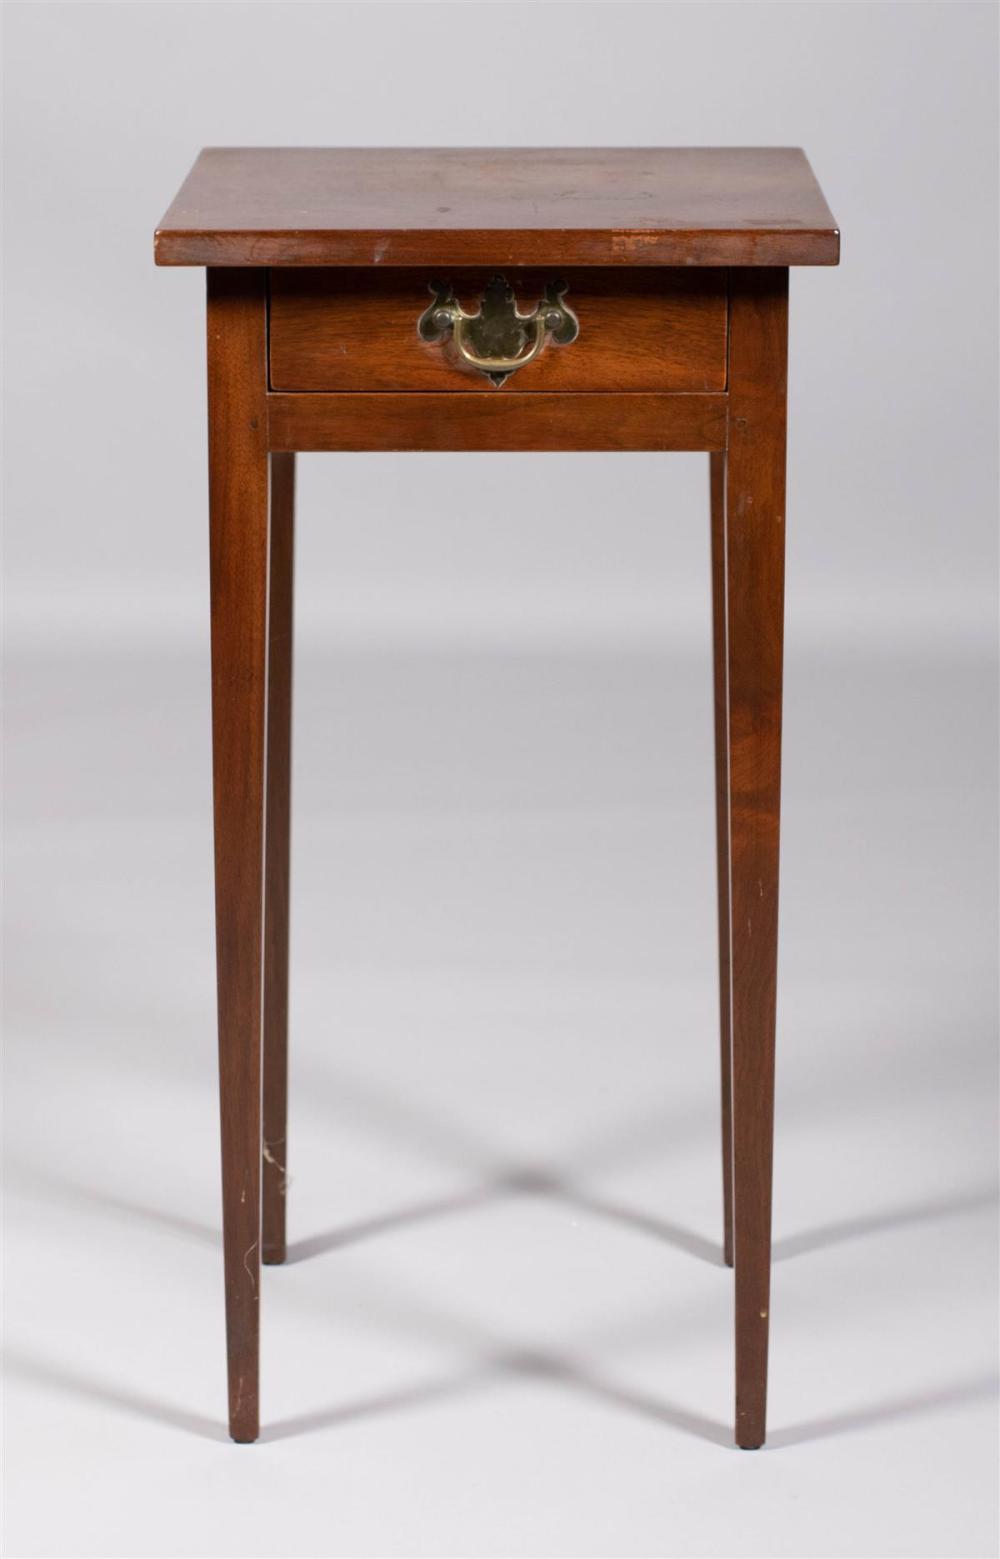 FEDERAL STYLE MAHOGANY SIDE TABLEFEDERAL